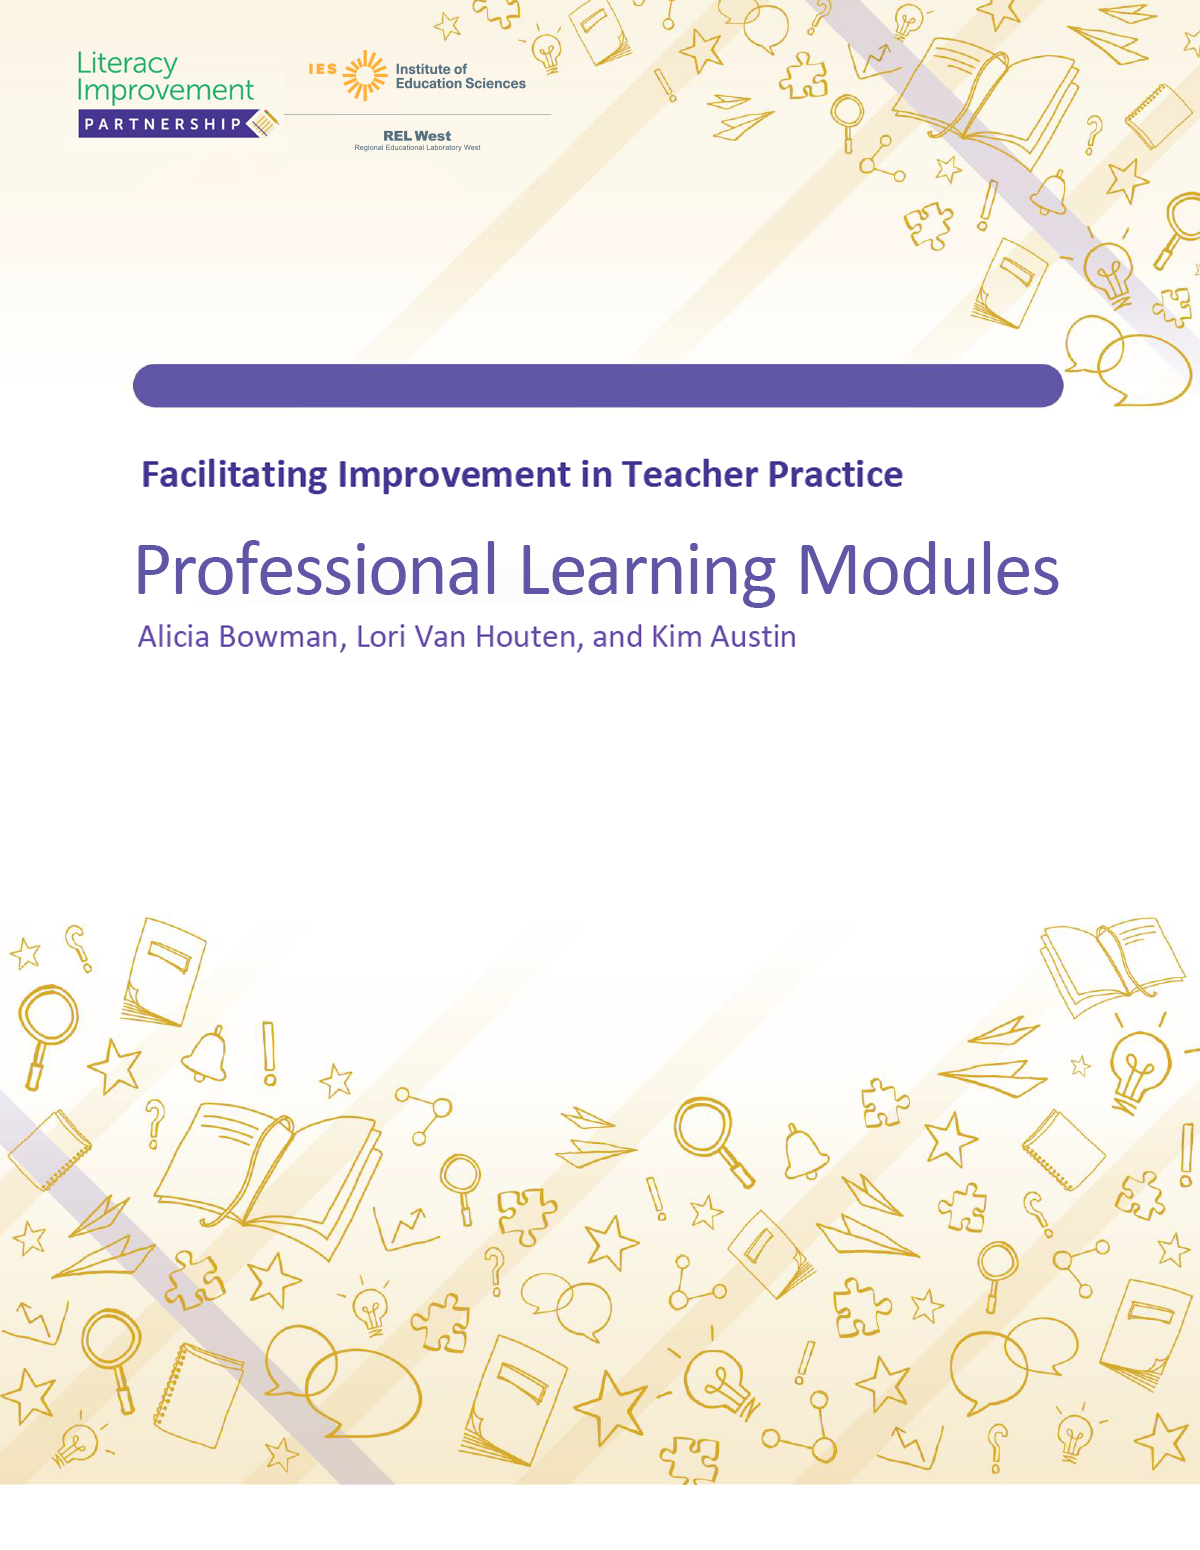 Professional Learning Modules